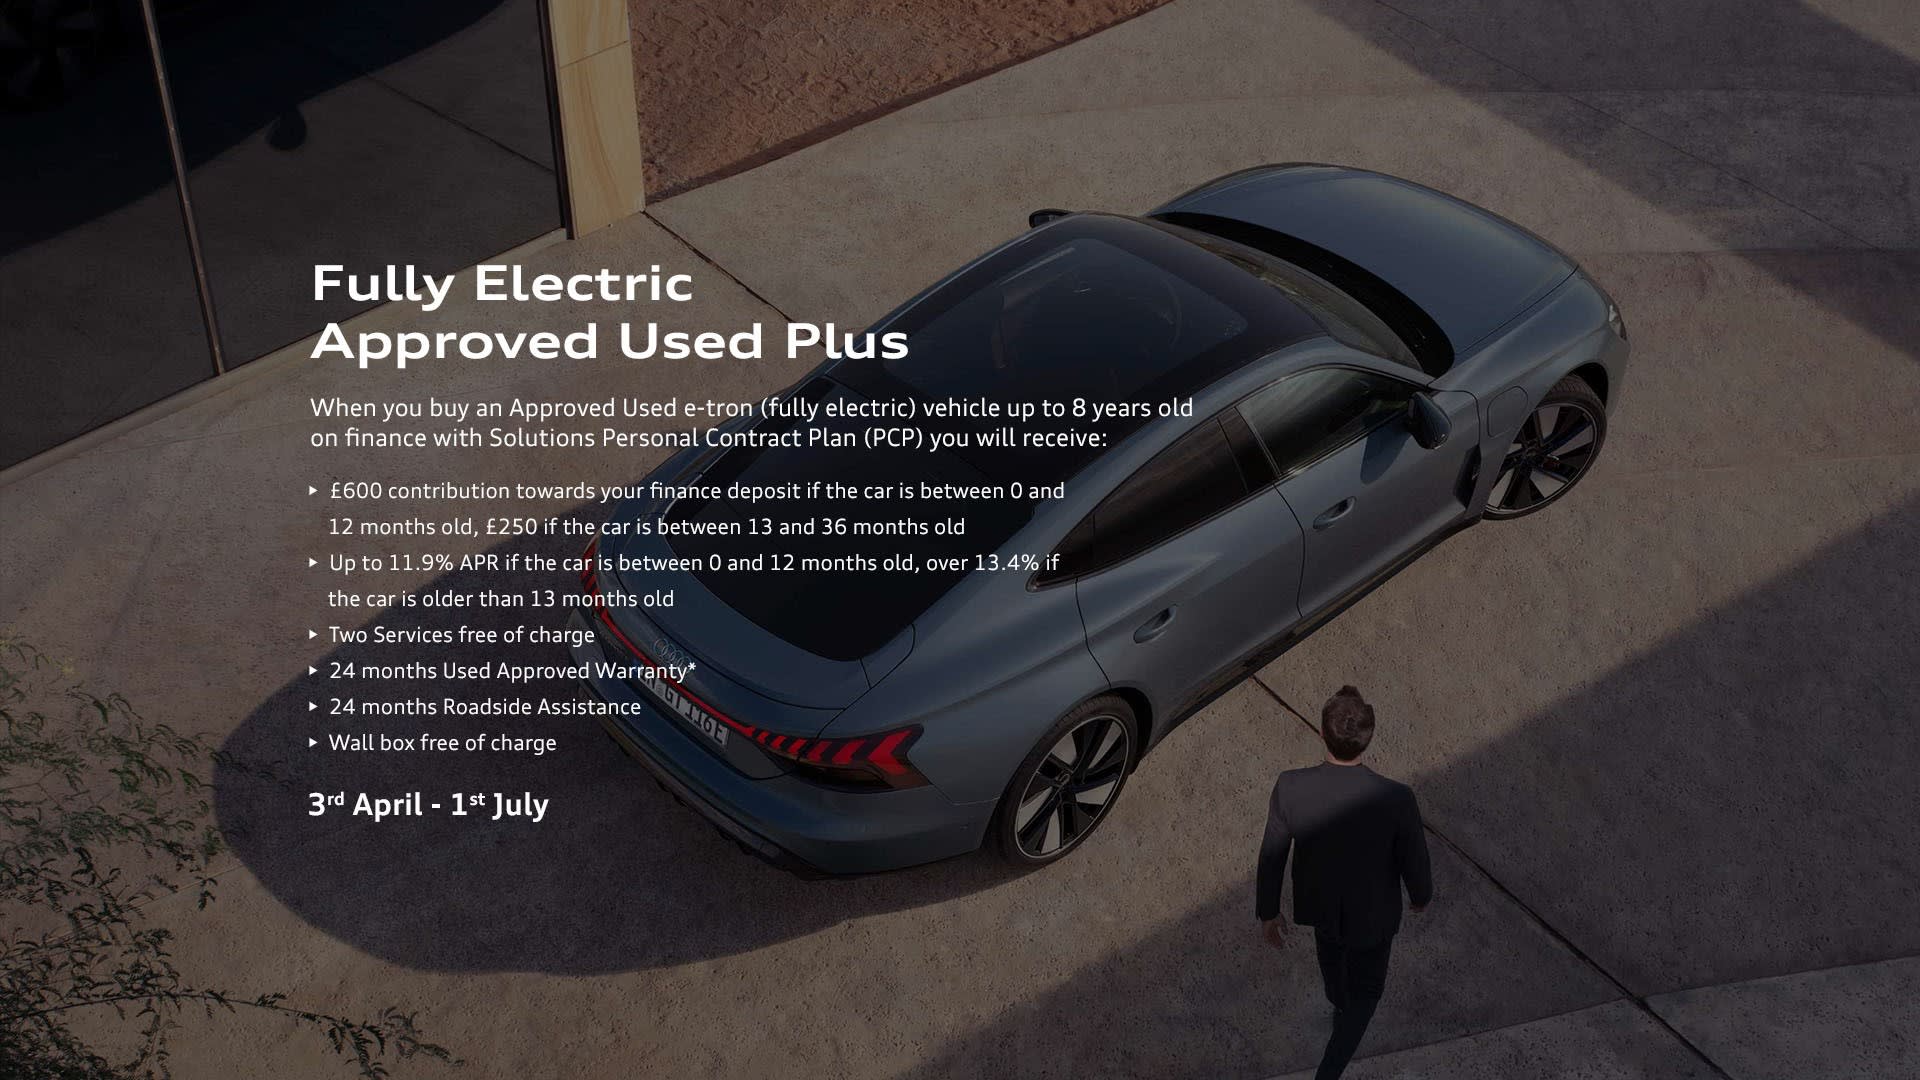 Audi Approved Used e-tron Offer